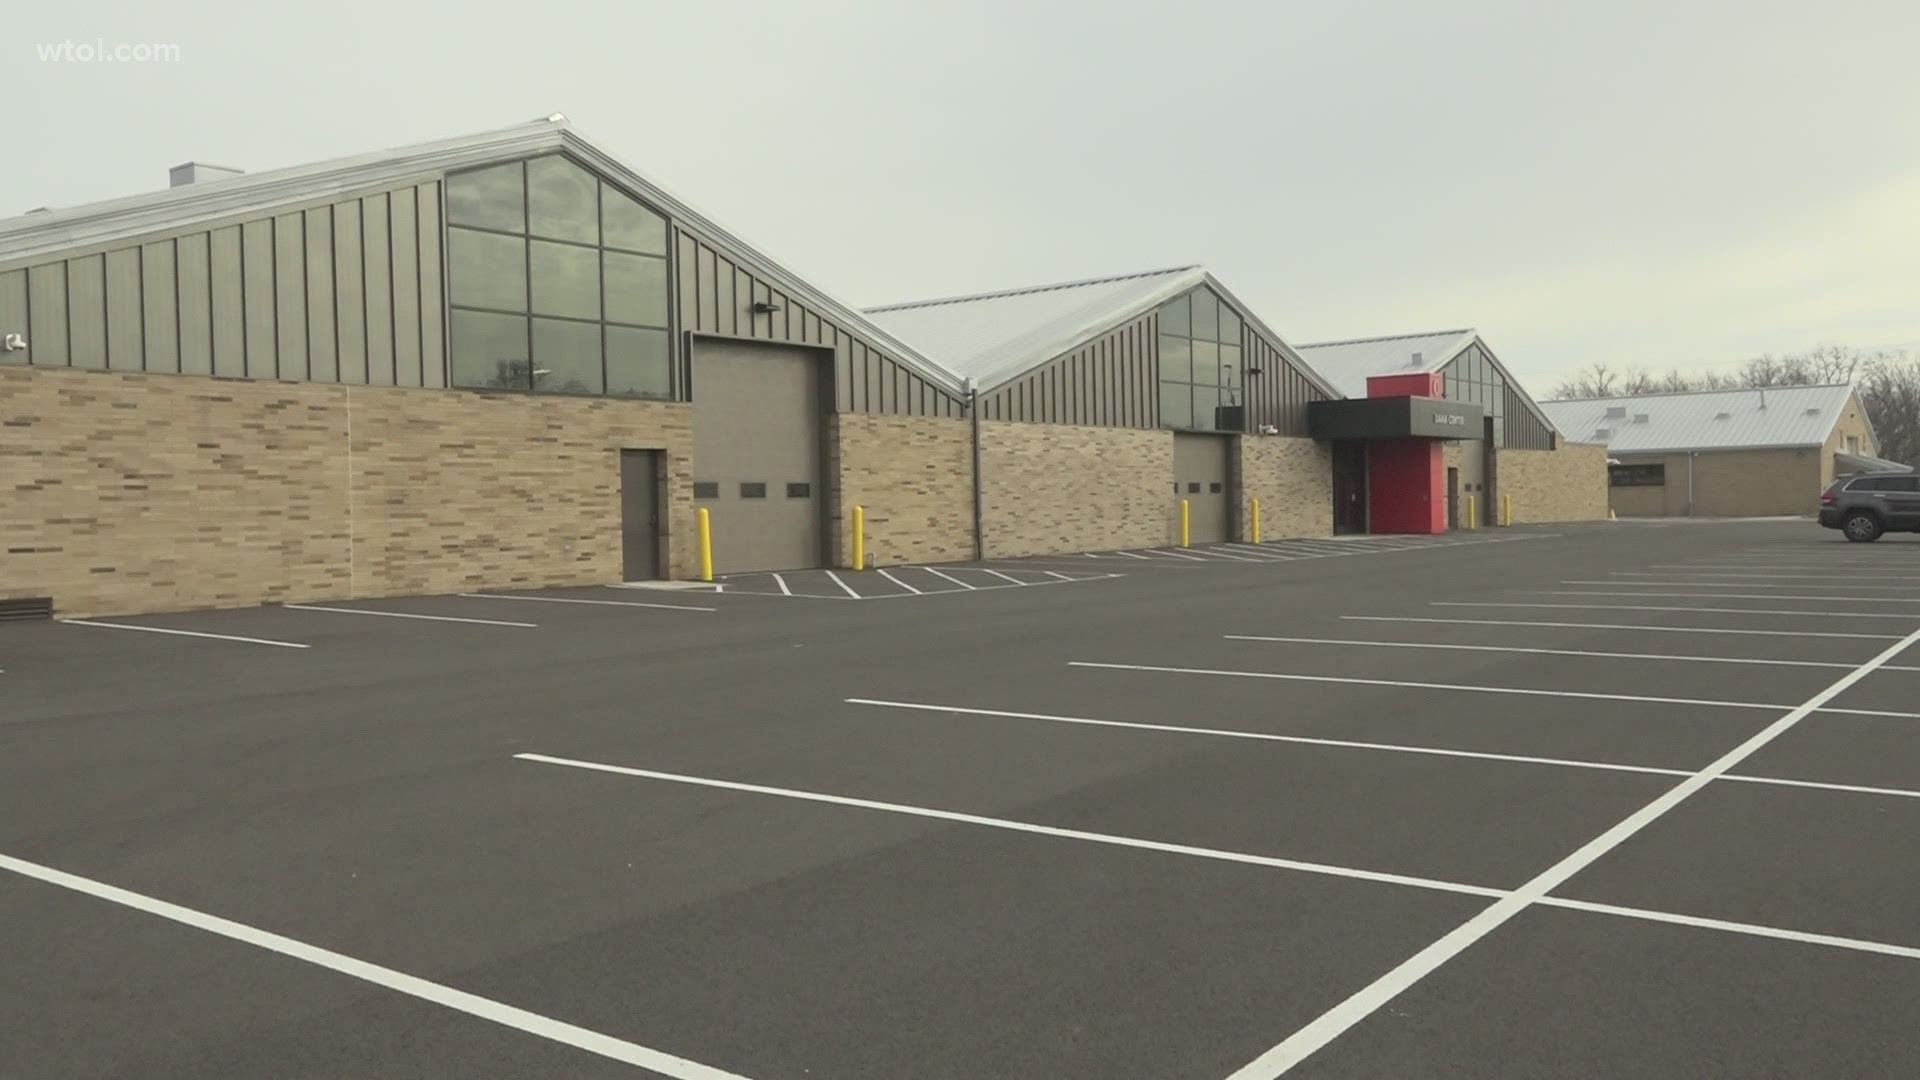 What started as storage buildings for Owens Community College is now a state-of-the-art facility for skilled trade programs. WTOL 11 gets a first look inside.